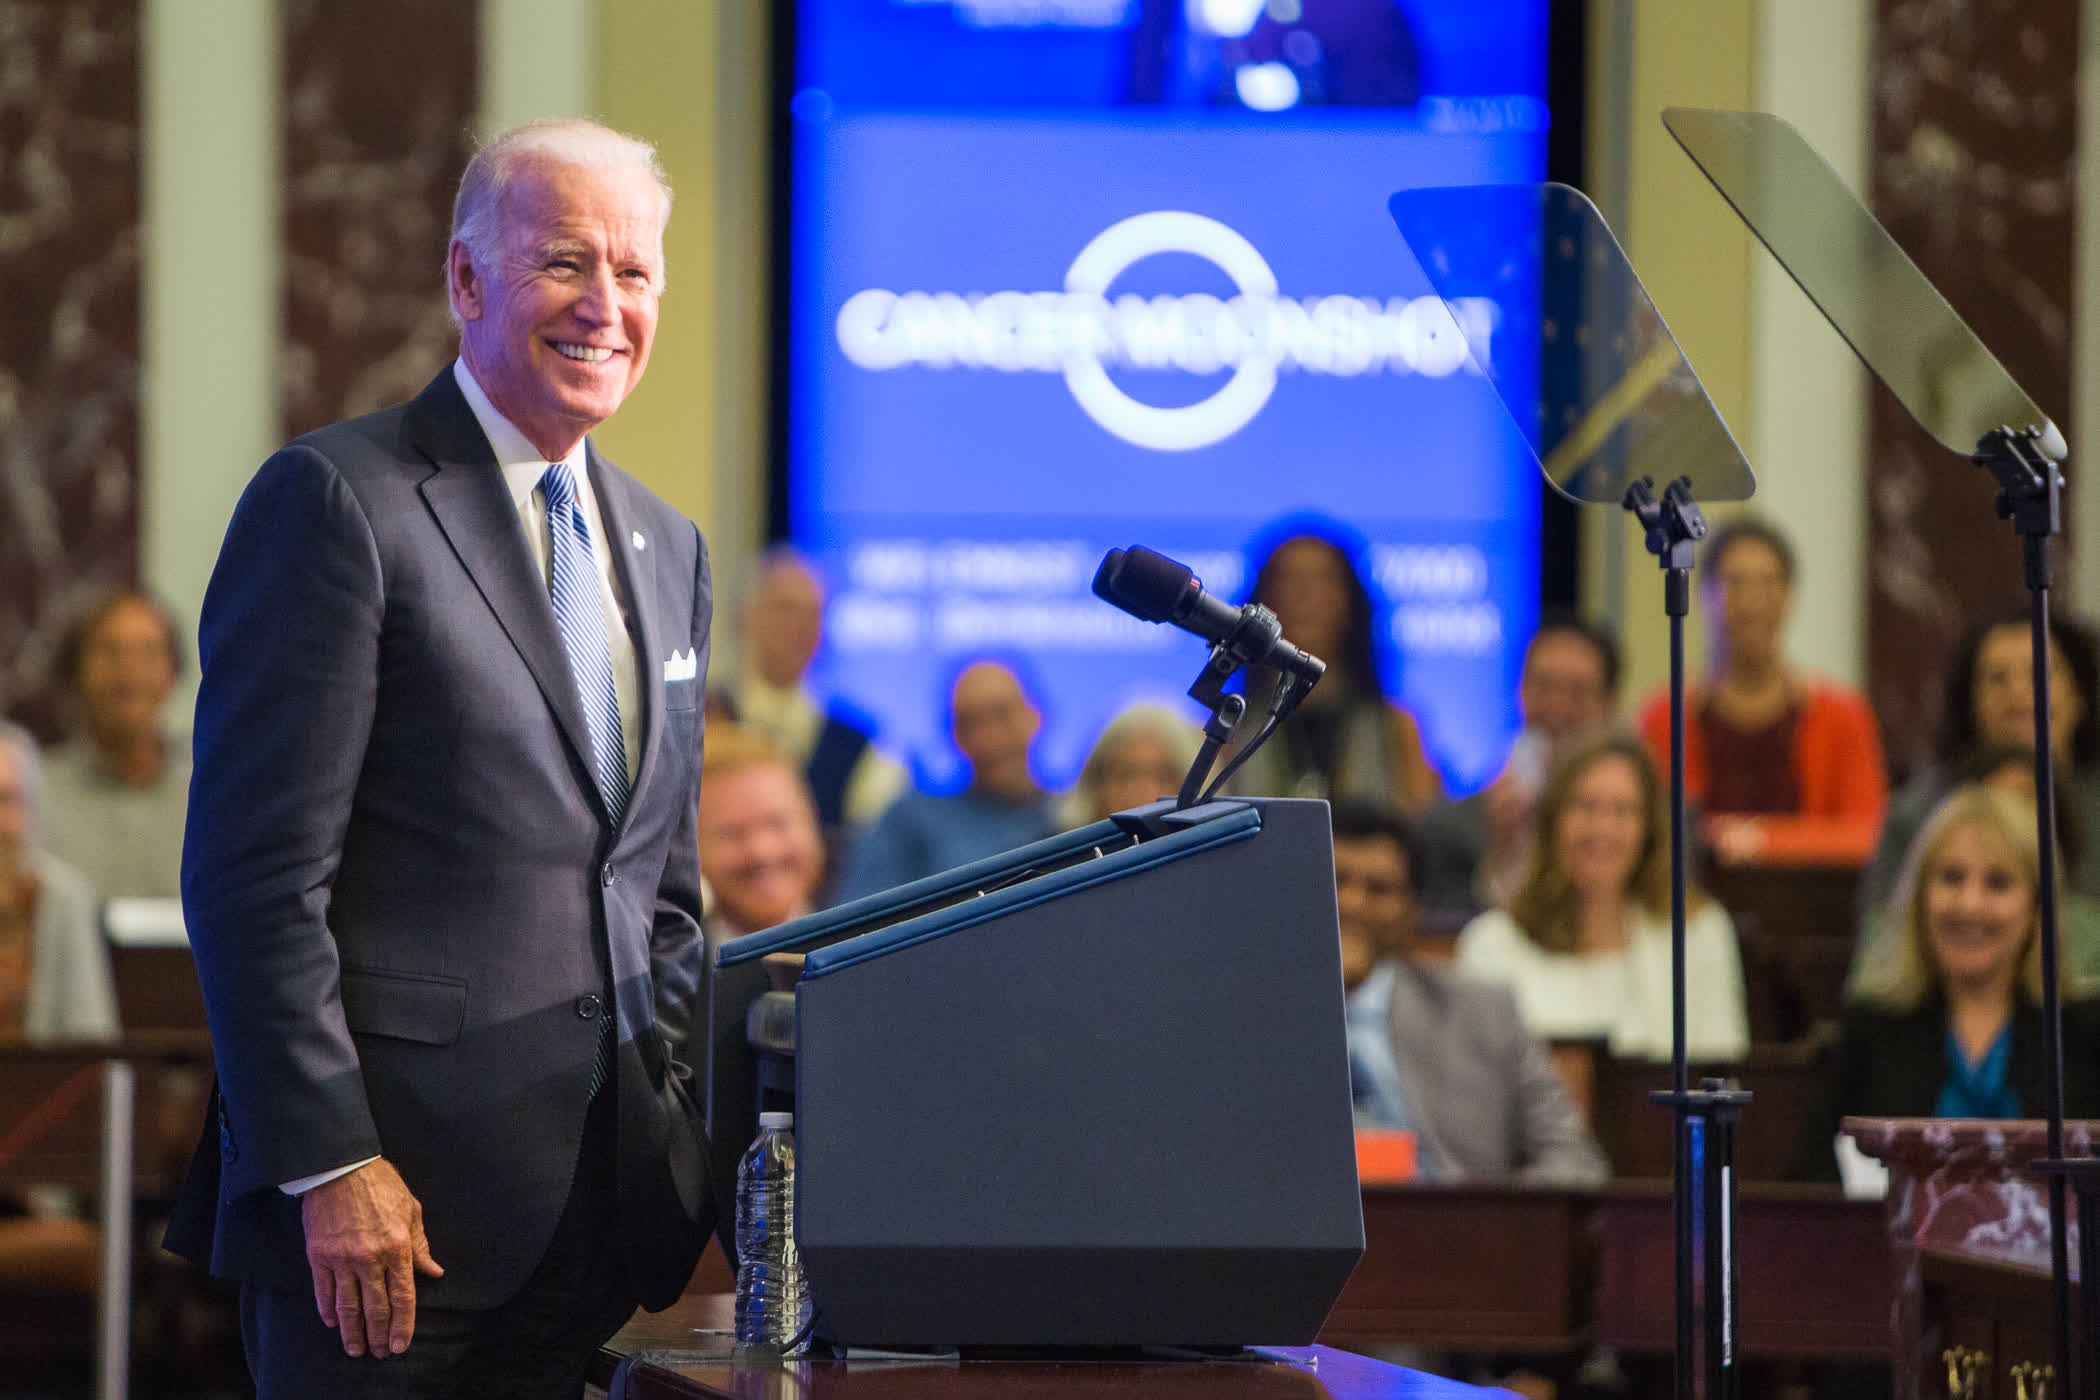 Social media influencers could get their own White House briefing room as Biden looks to younger voters